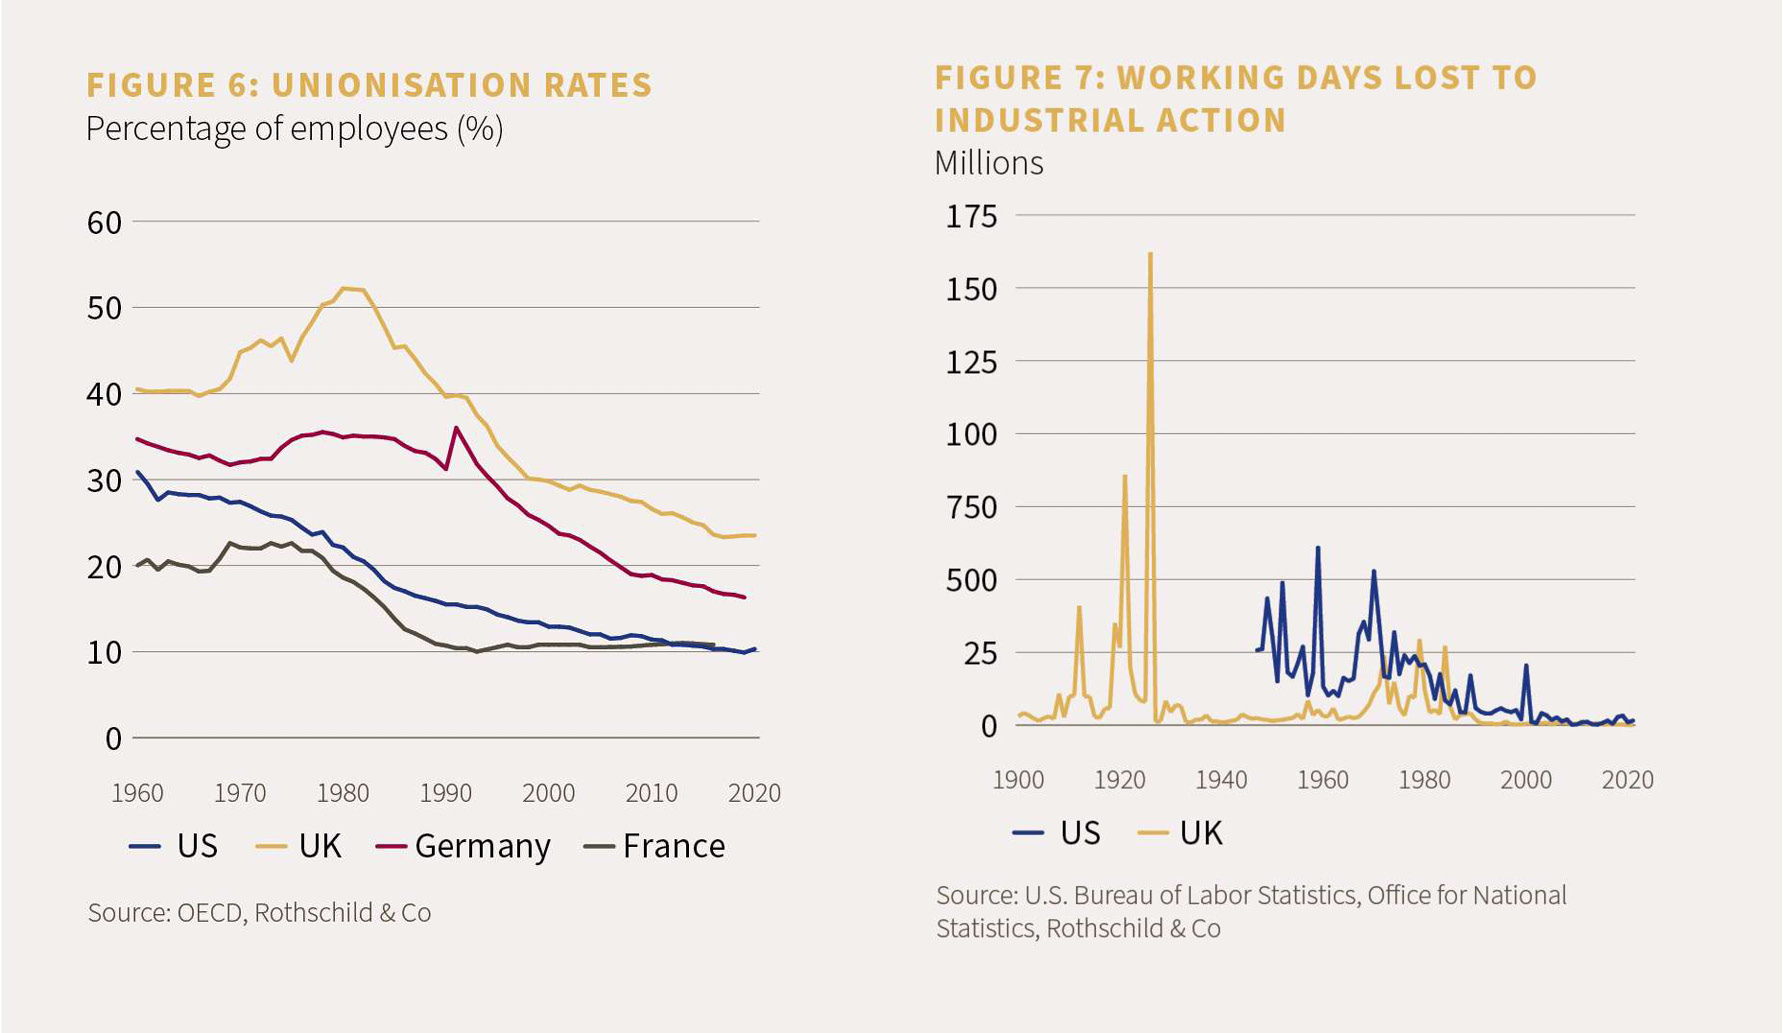 Chart 6 showing unionisation rates with chart 7 showing working days lost to industrial action